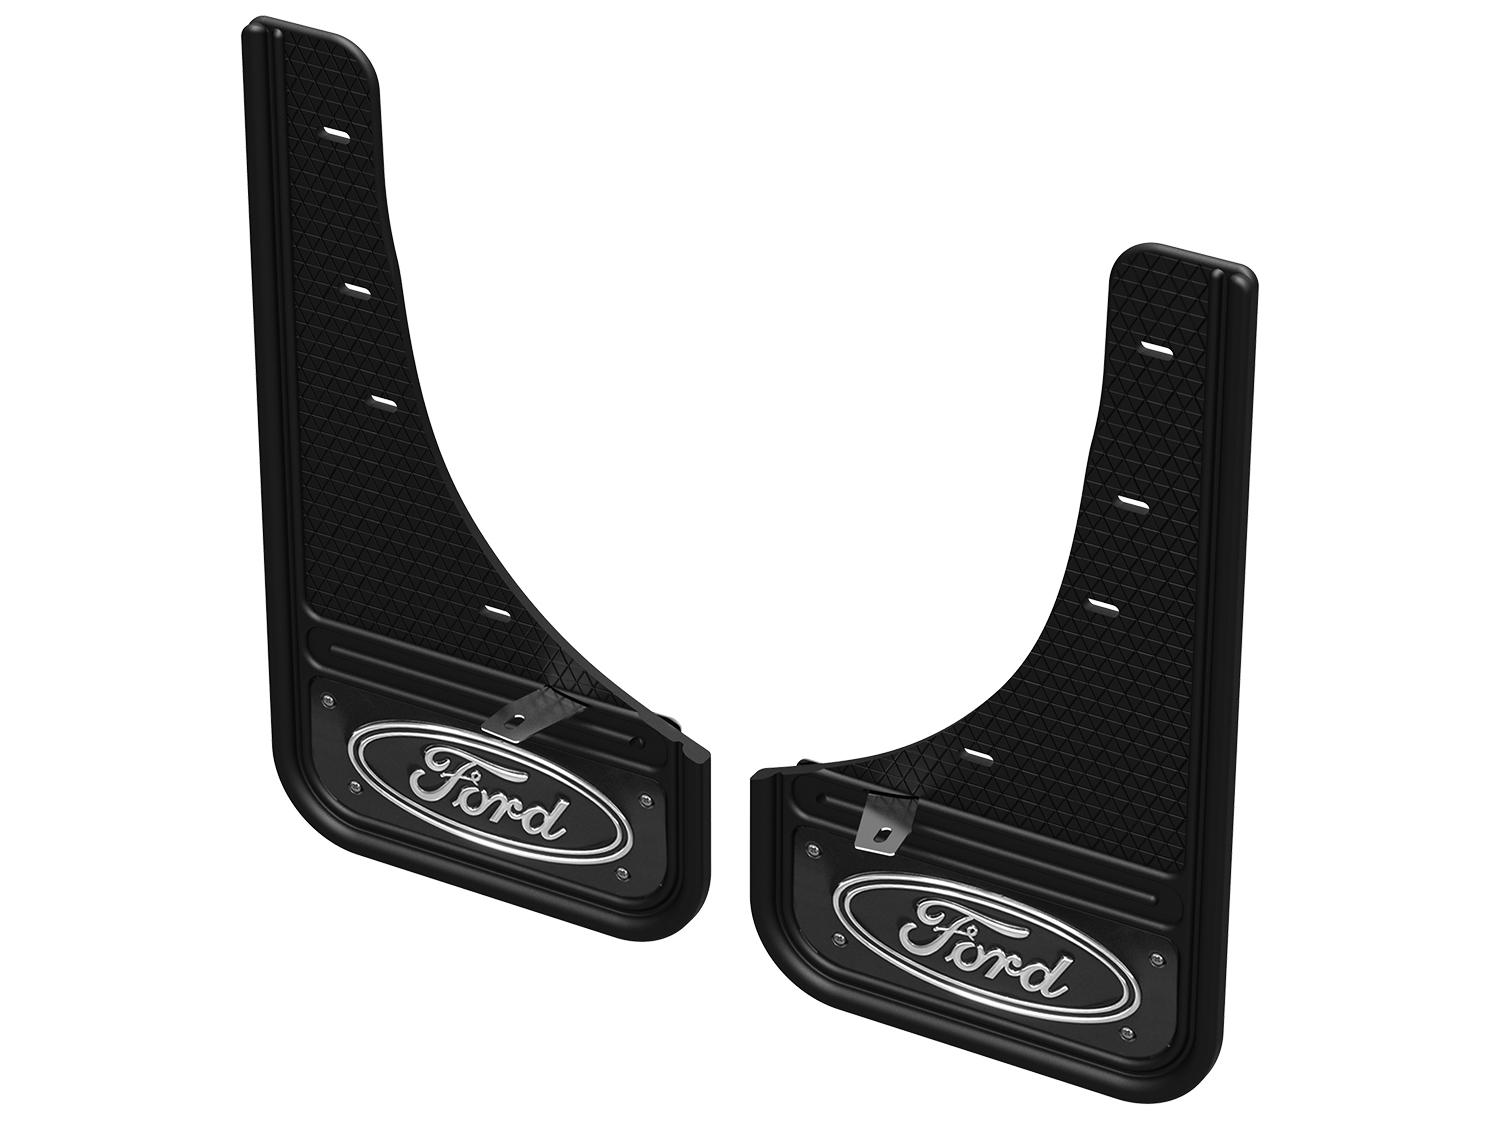 Splash Guards - Rear with Ford Oval Logo